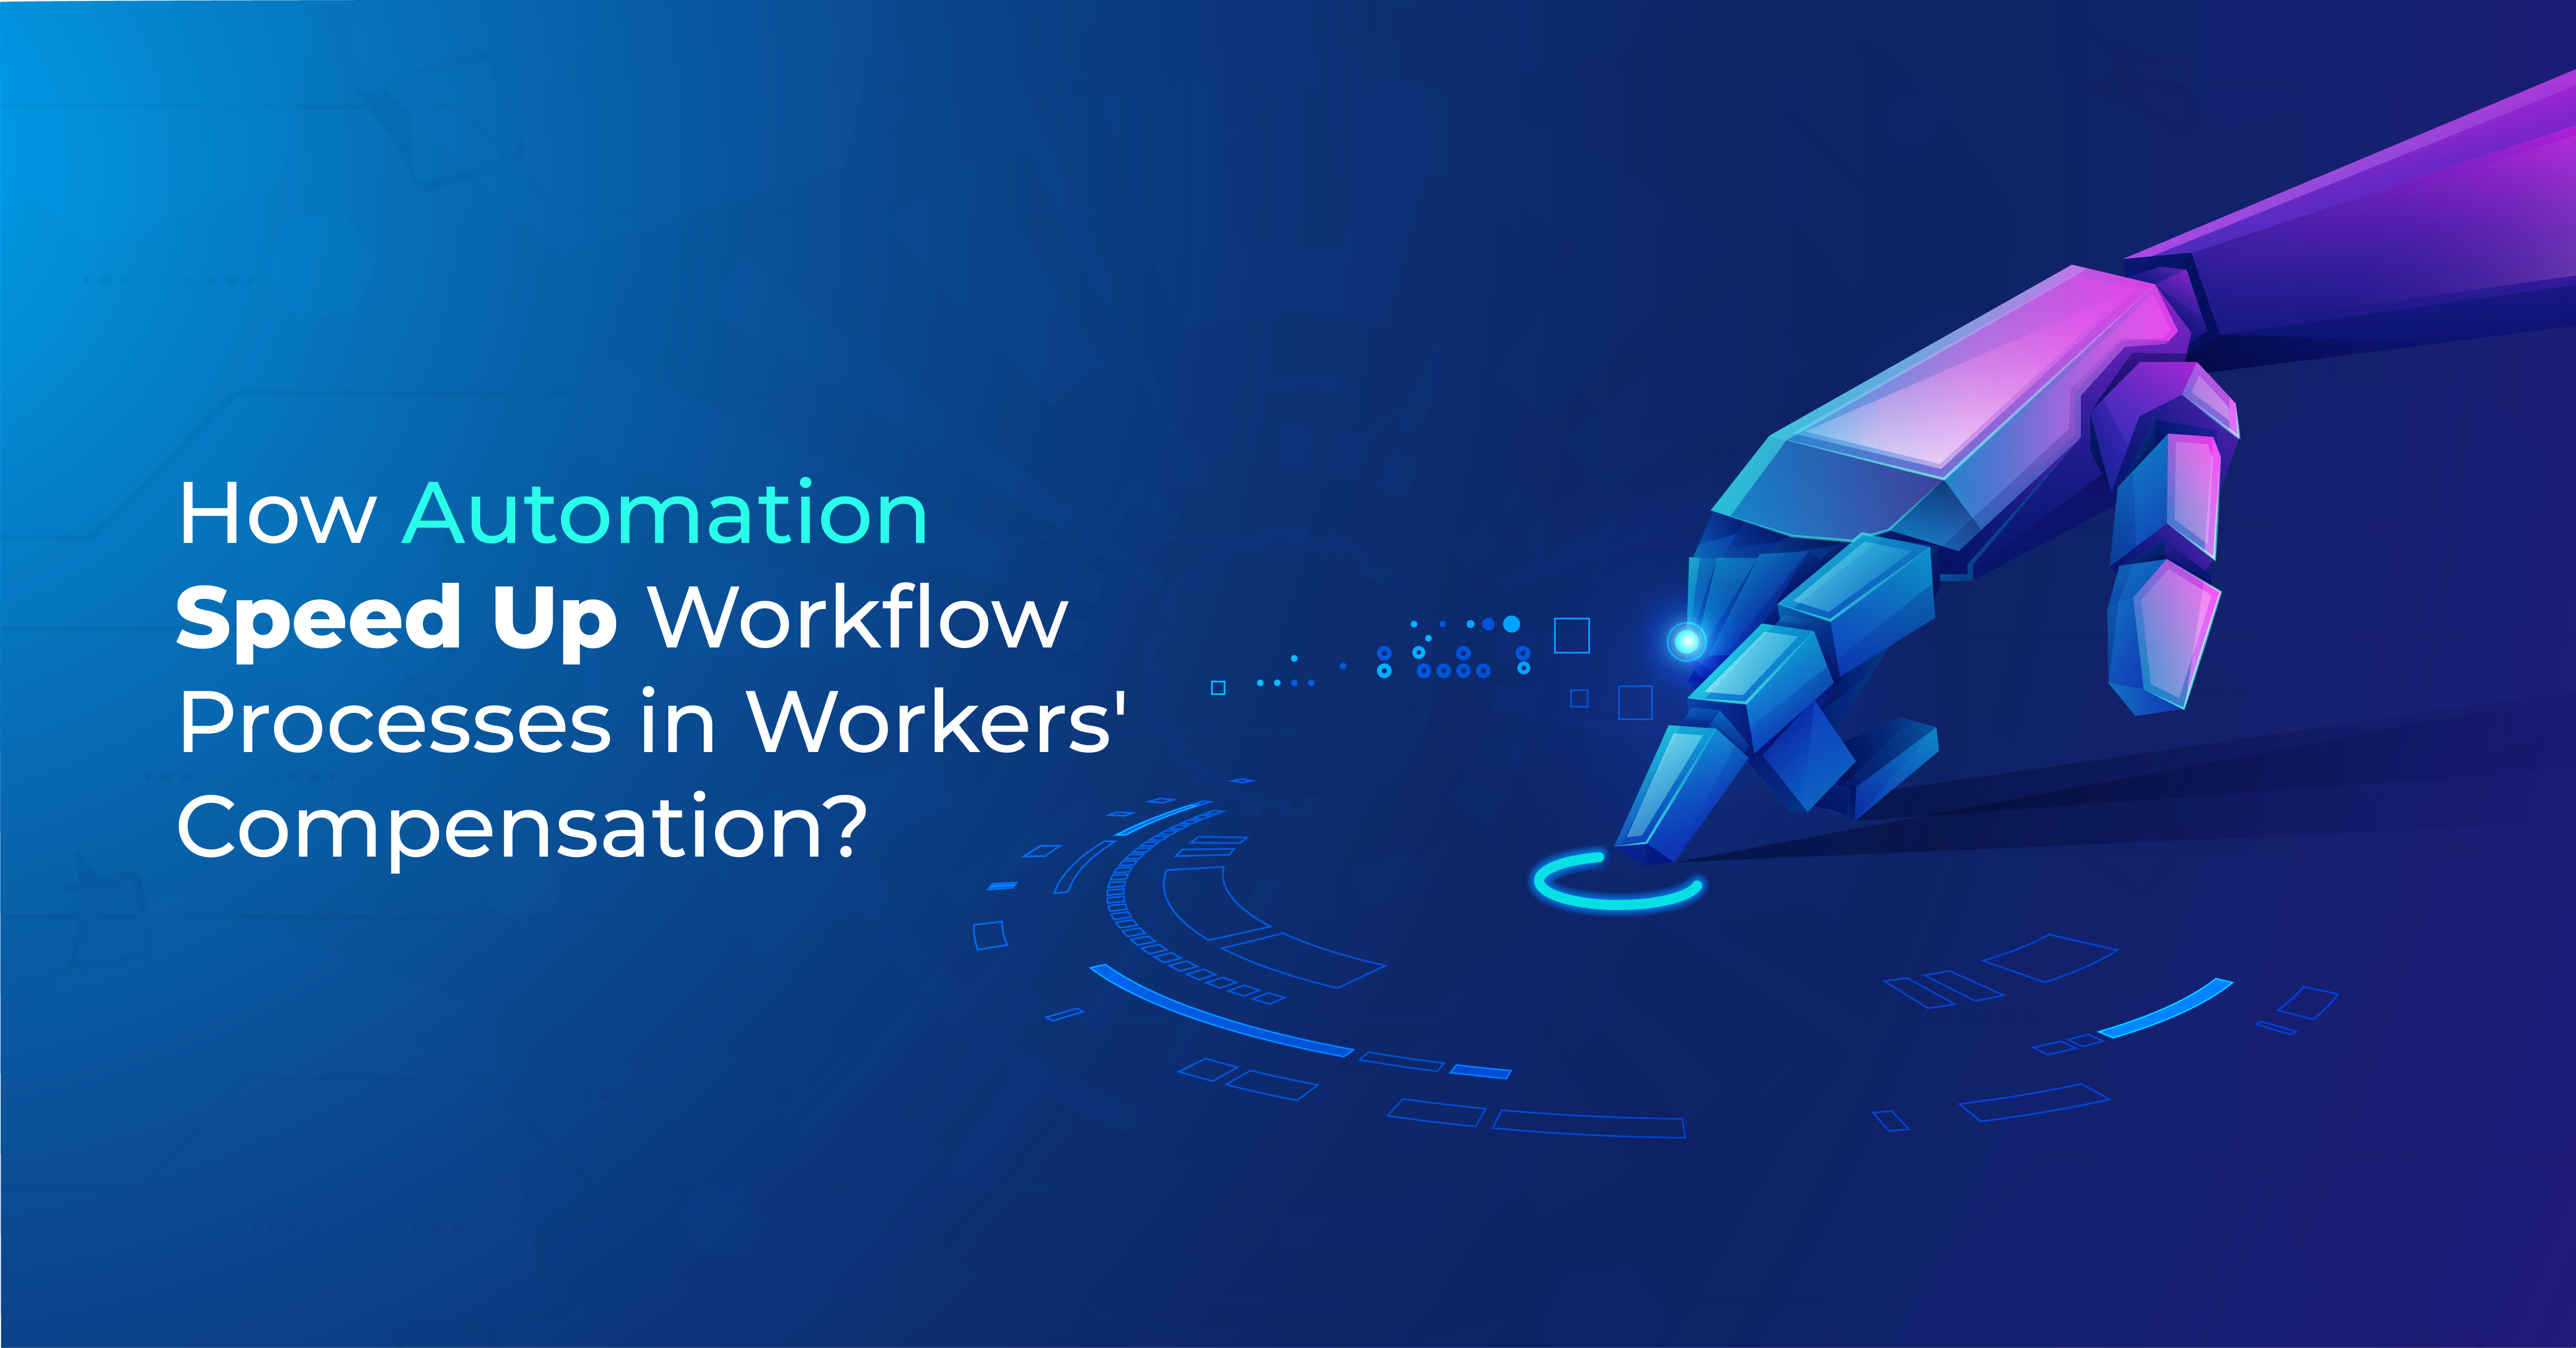 How Does Automation Speed Up Workflow Processes in Workers' Compensation?